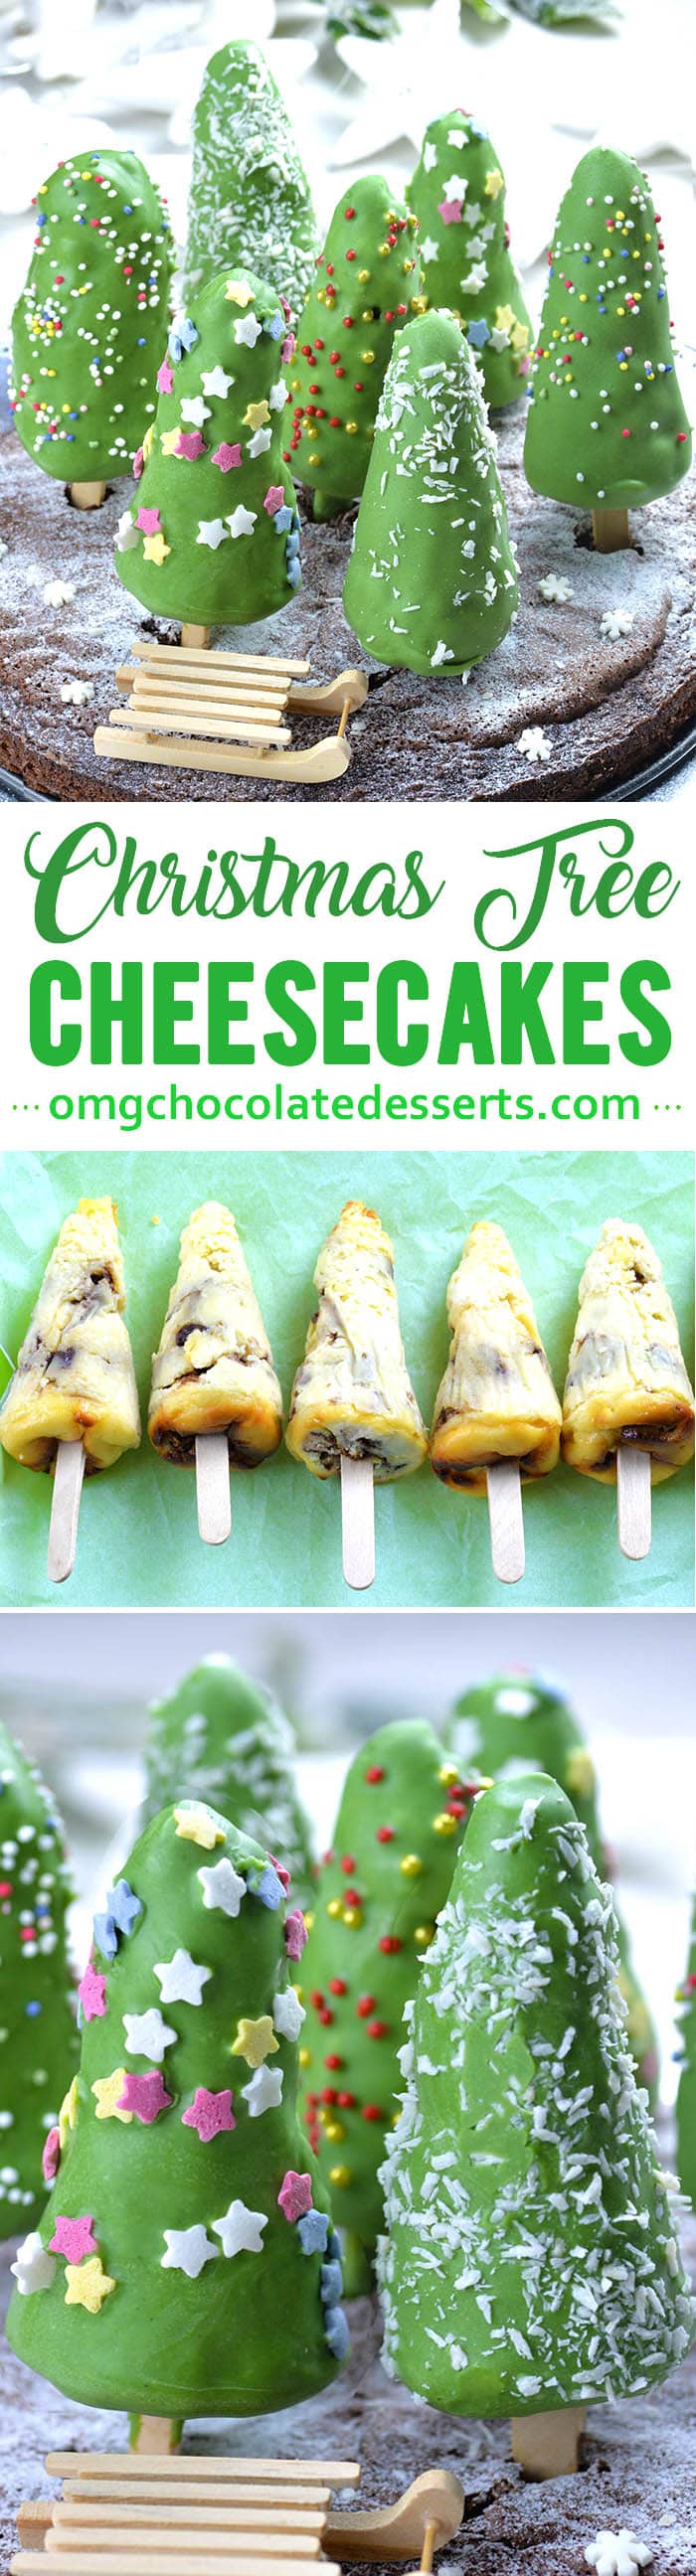 Christmas Tree Cheesecake on a stick is festive and fabulous Christmas treat. Eating cheesecake has never been this fun! Mini cheesecakes in the shape of Christmas tree, overload with candy bars are perfect Christmas party dessert!